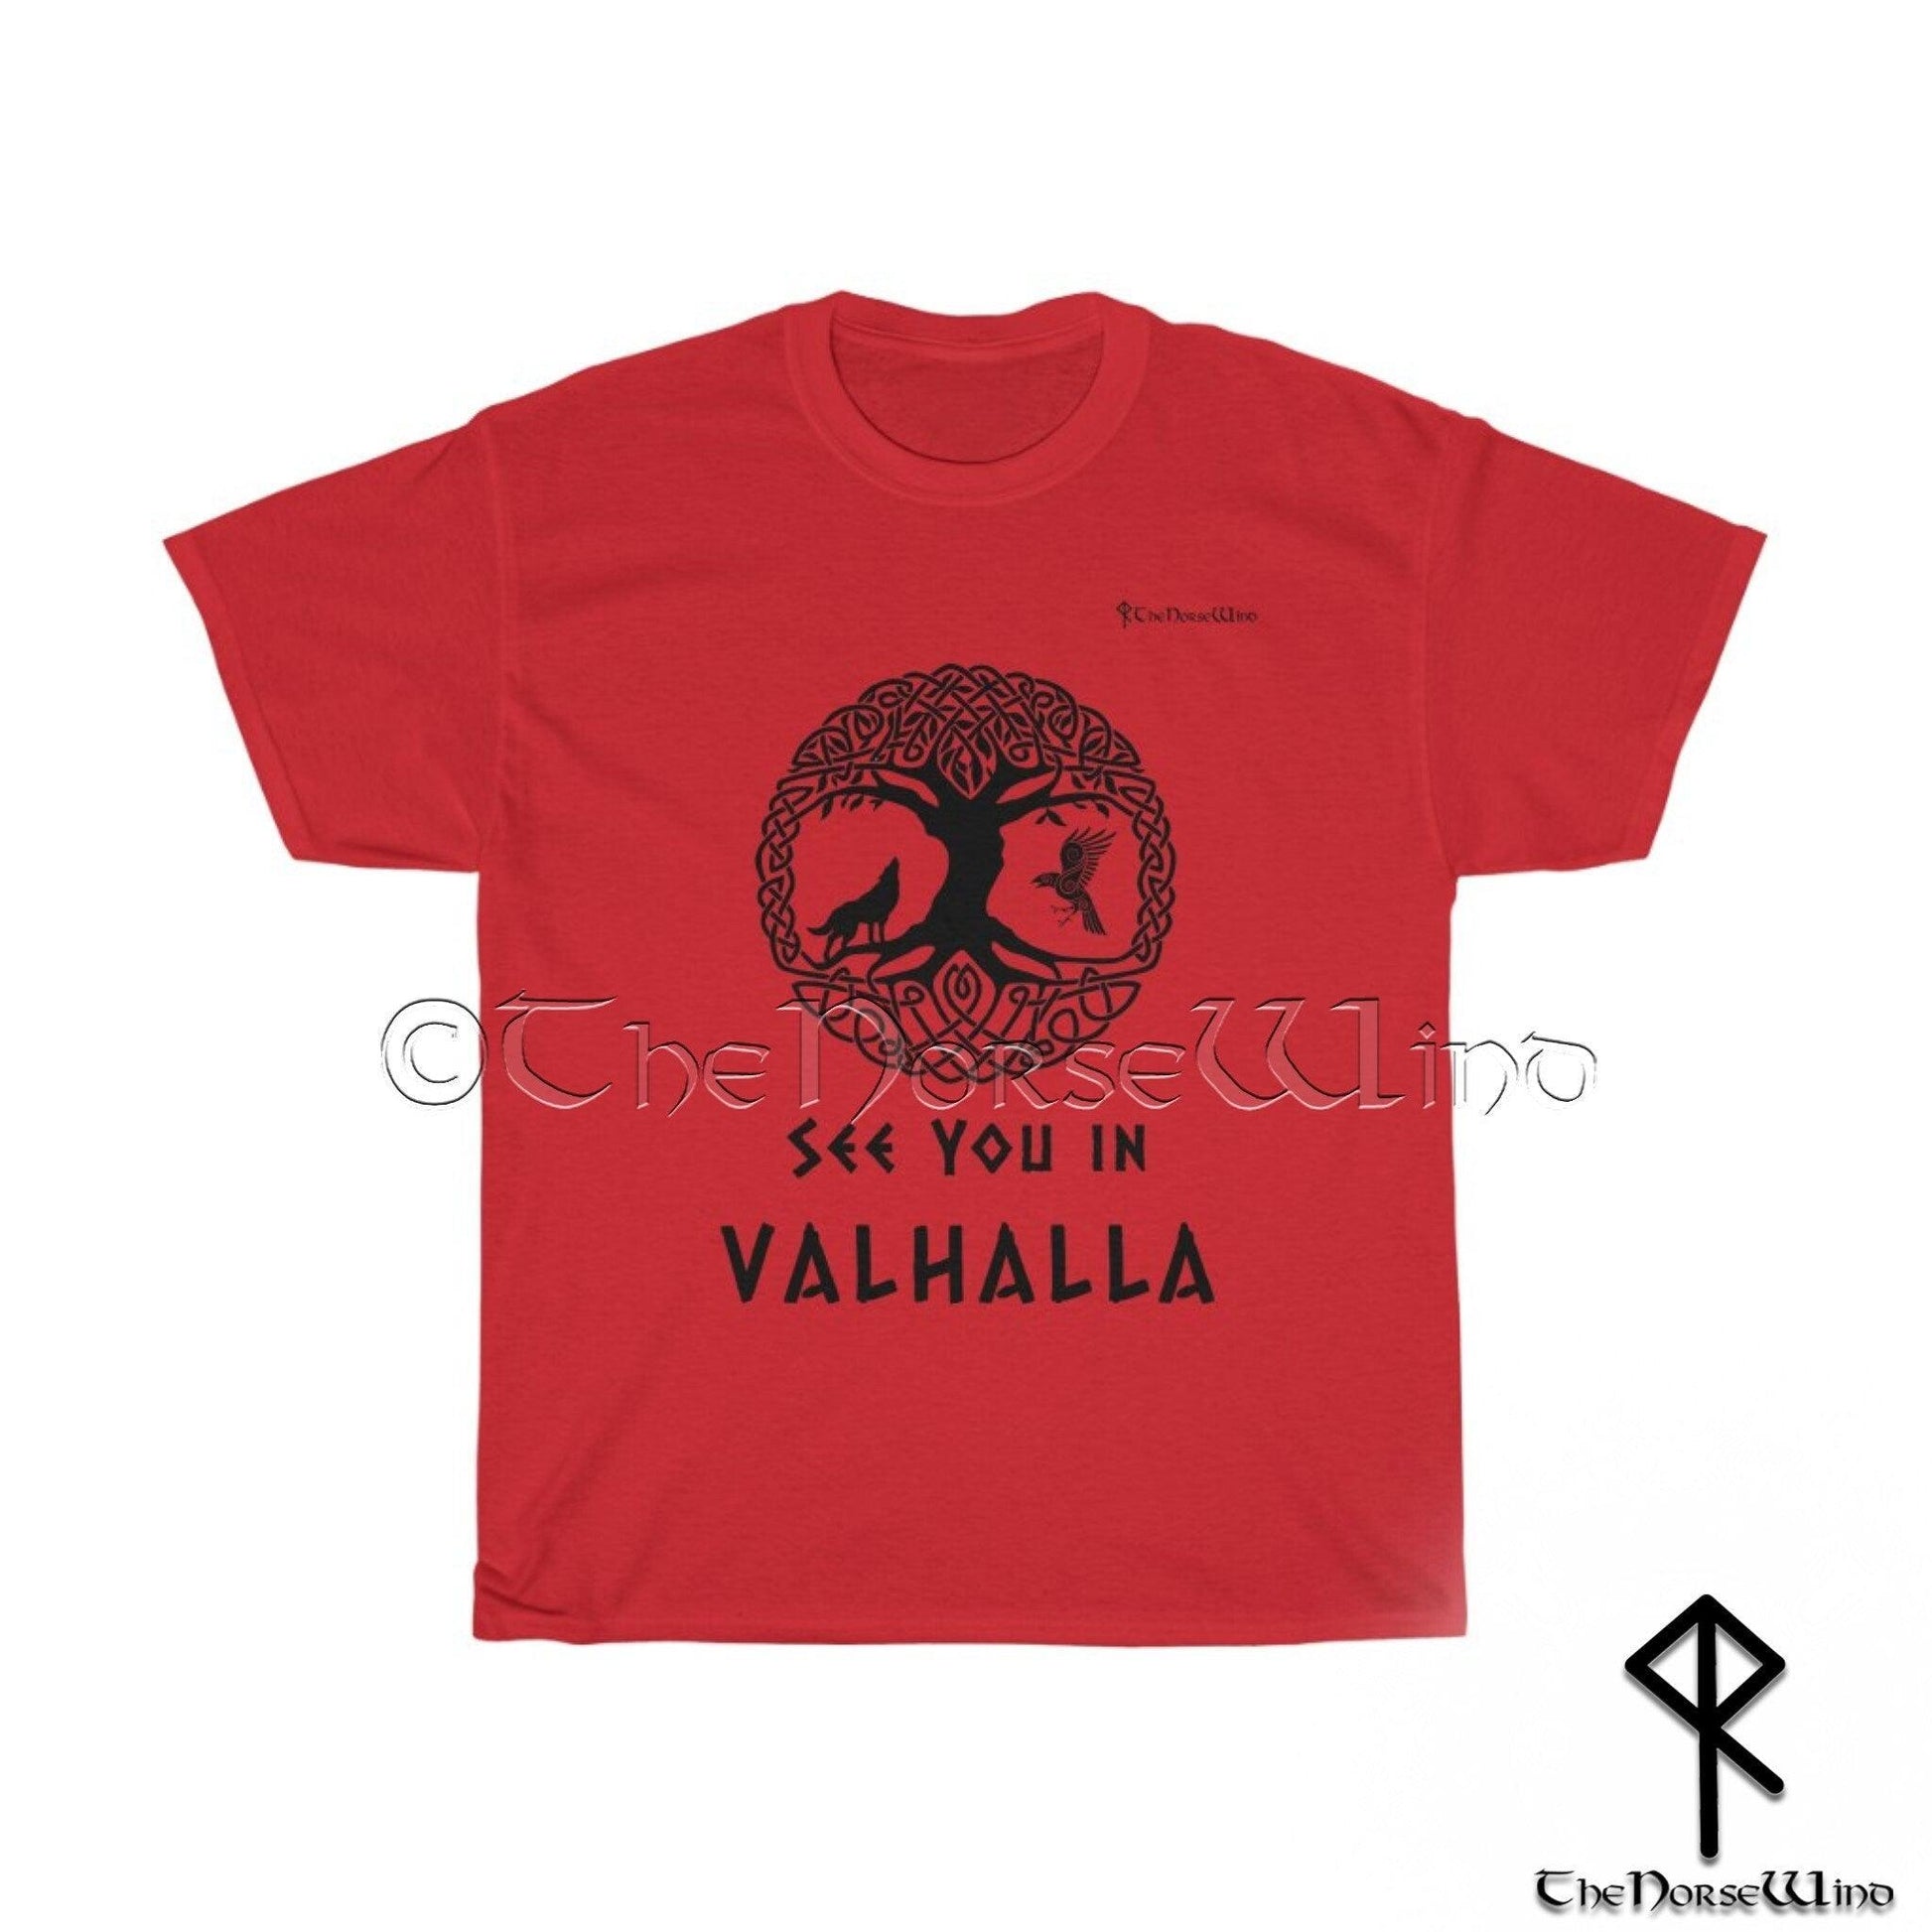 VALHALLA Viking T-Shirt with Yggdrasil Celtic Tree of Life, Unisex S - 5XL - TheNorseWind